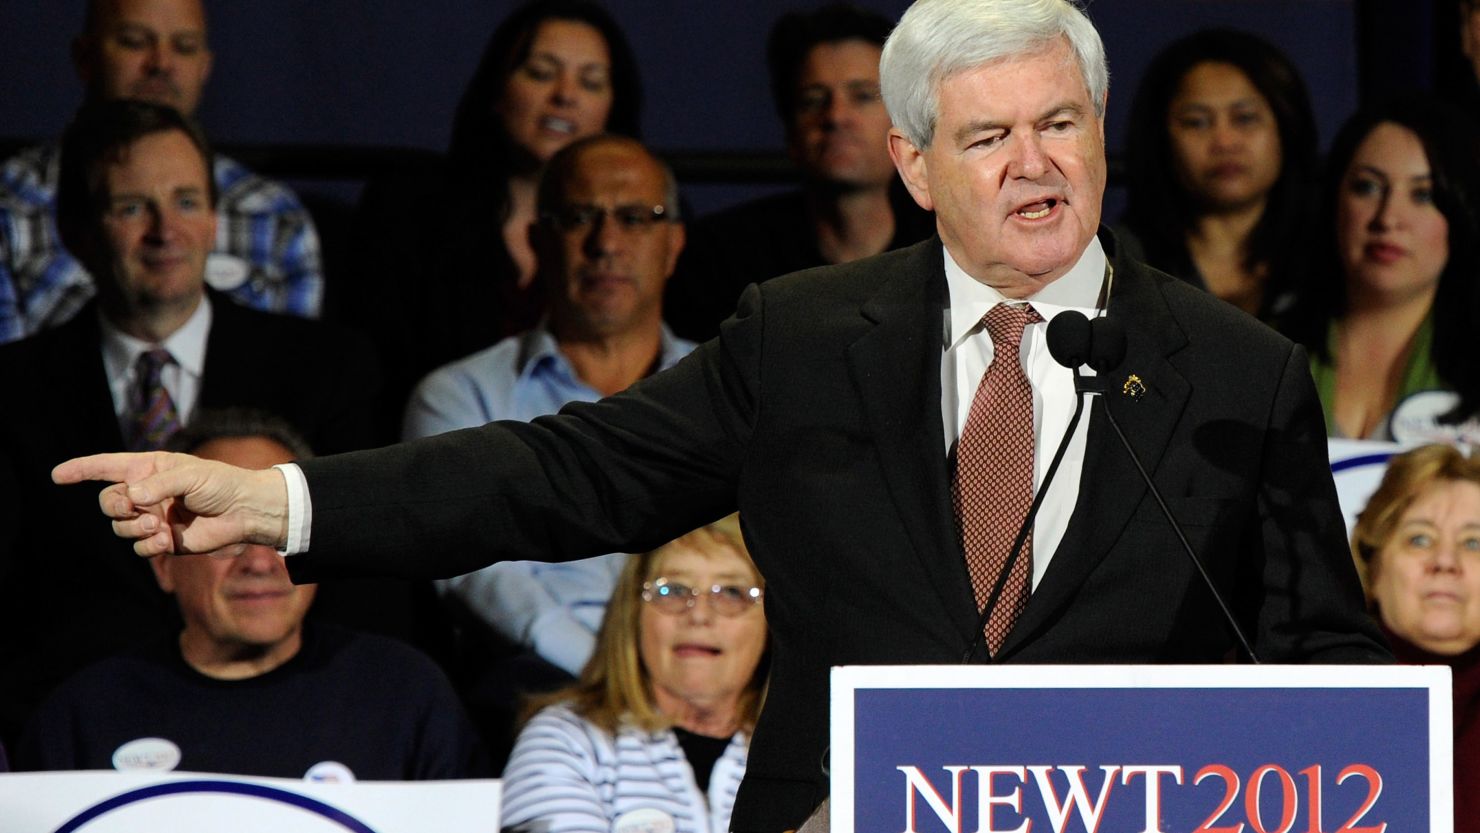 Newt Gingrich campaigns Friday in Las Vegas, the day before losing the Nevada caucuses to Mitt Romney.